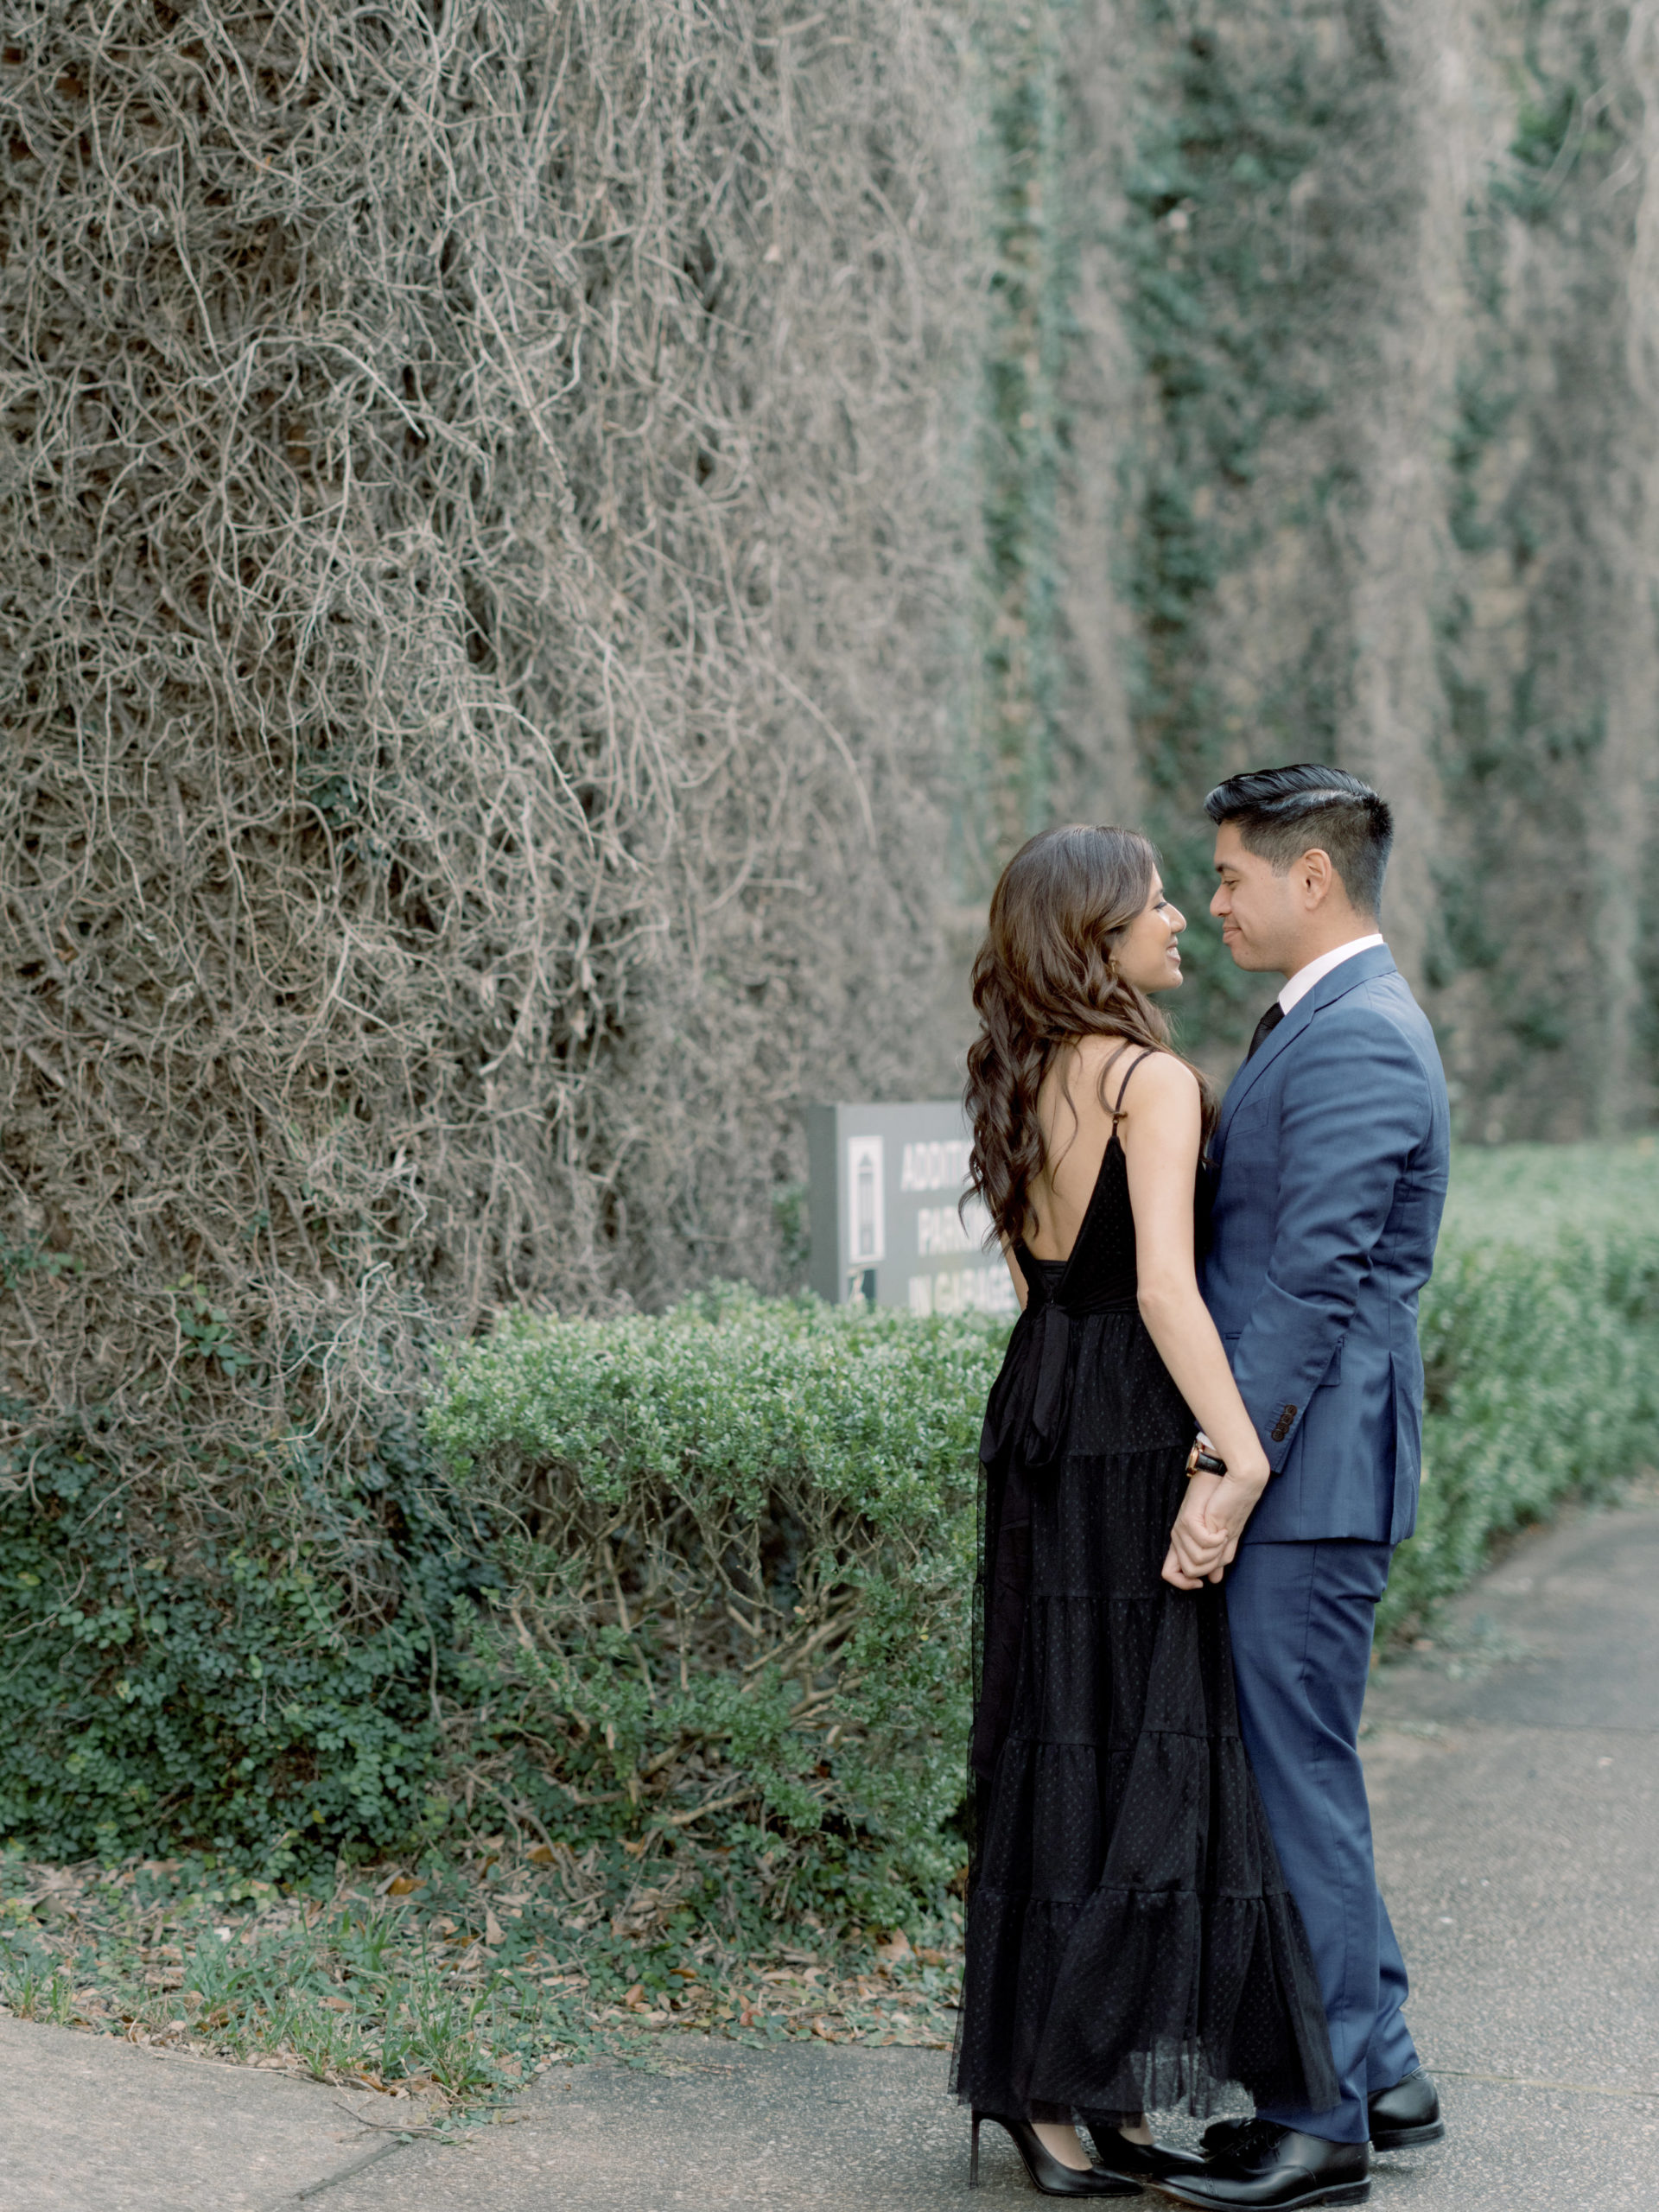 The engaged couple are standing close to each other in front of an ivy-covered building. Editorial Engagement photos by Jenny Fu Studio